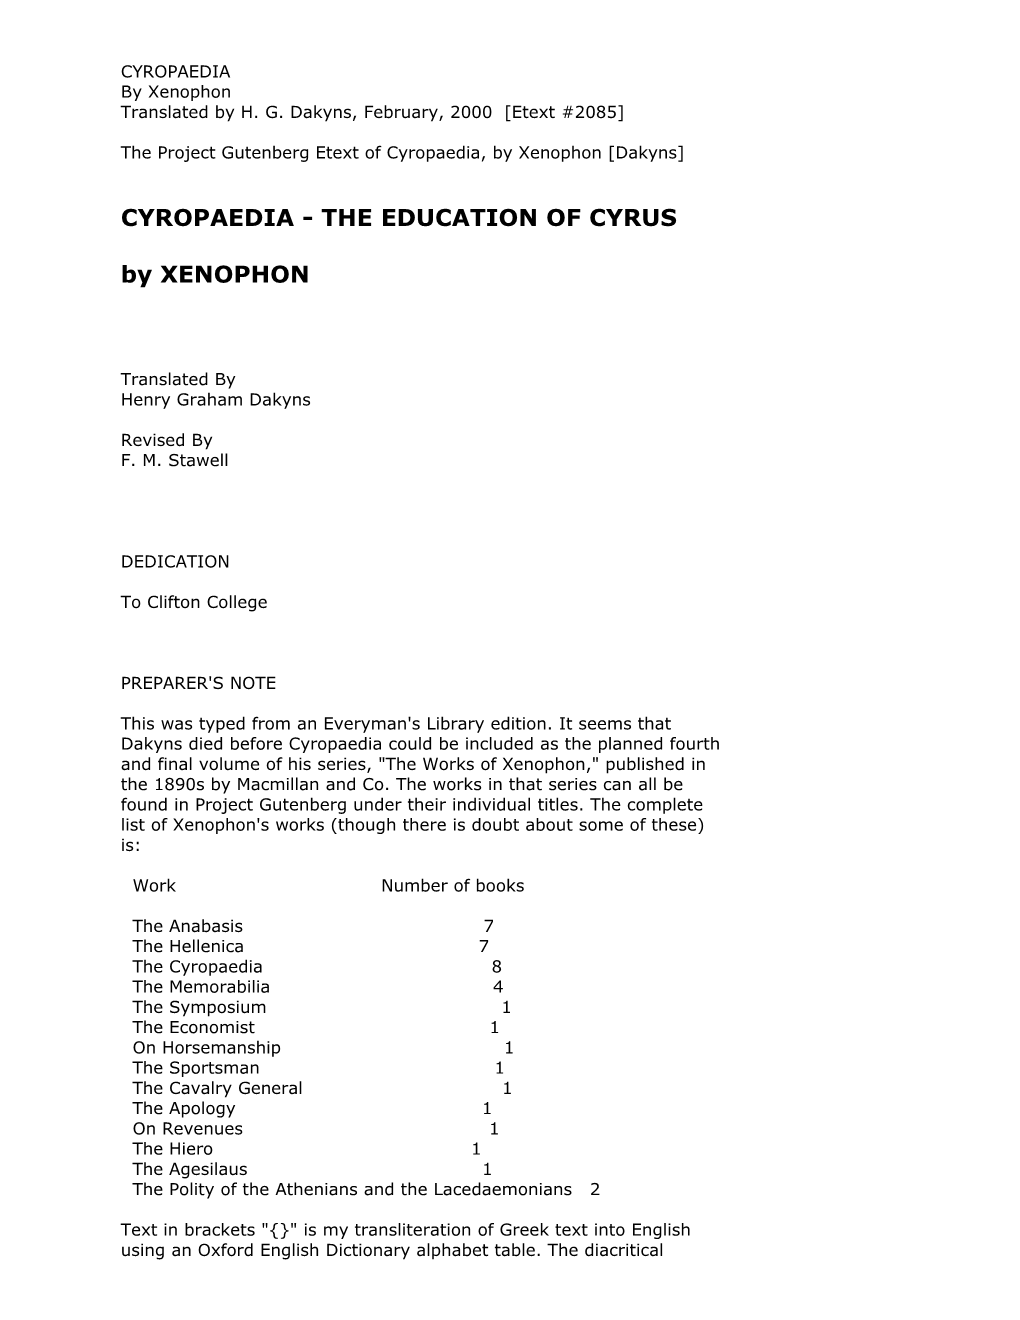 The Project Gutenberg Etext of Cyropaedia, by Xenophon Dakyns